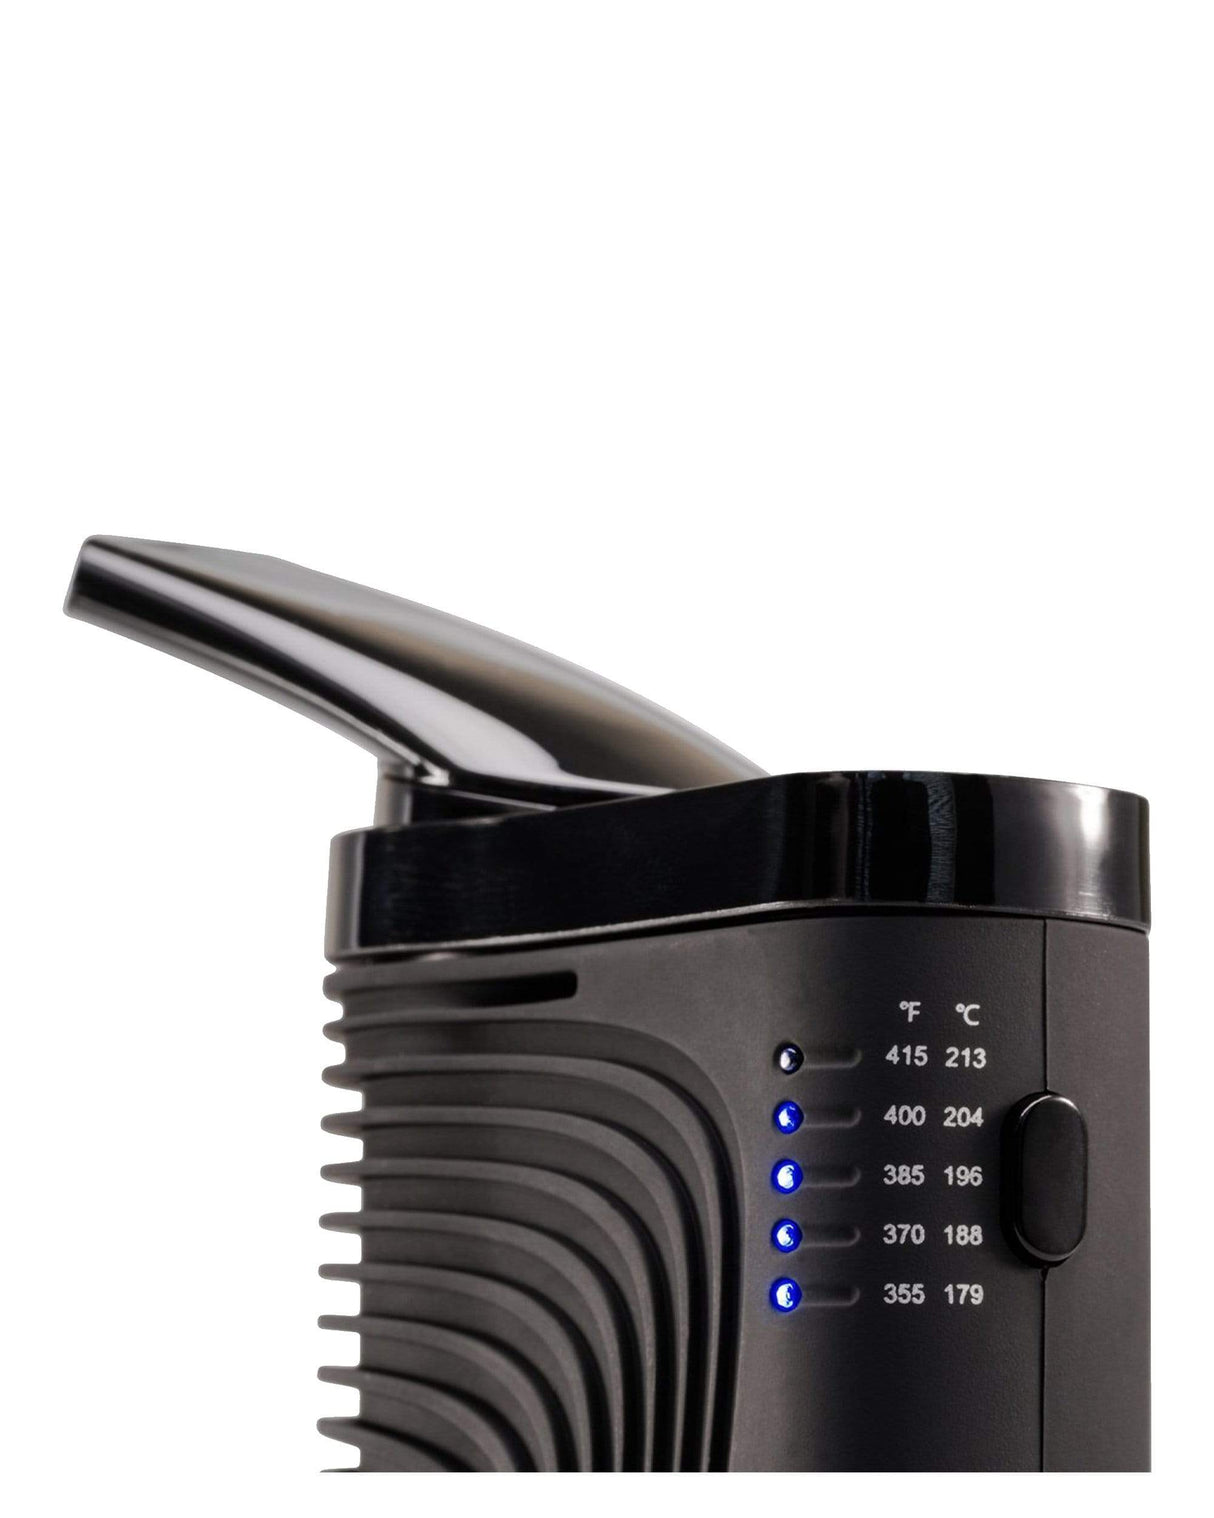 Boundless CF Vaporizer in Black - Portable Design with Ceramic Oven